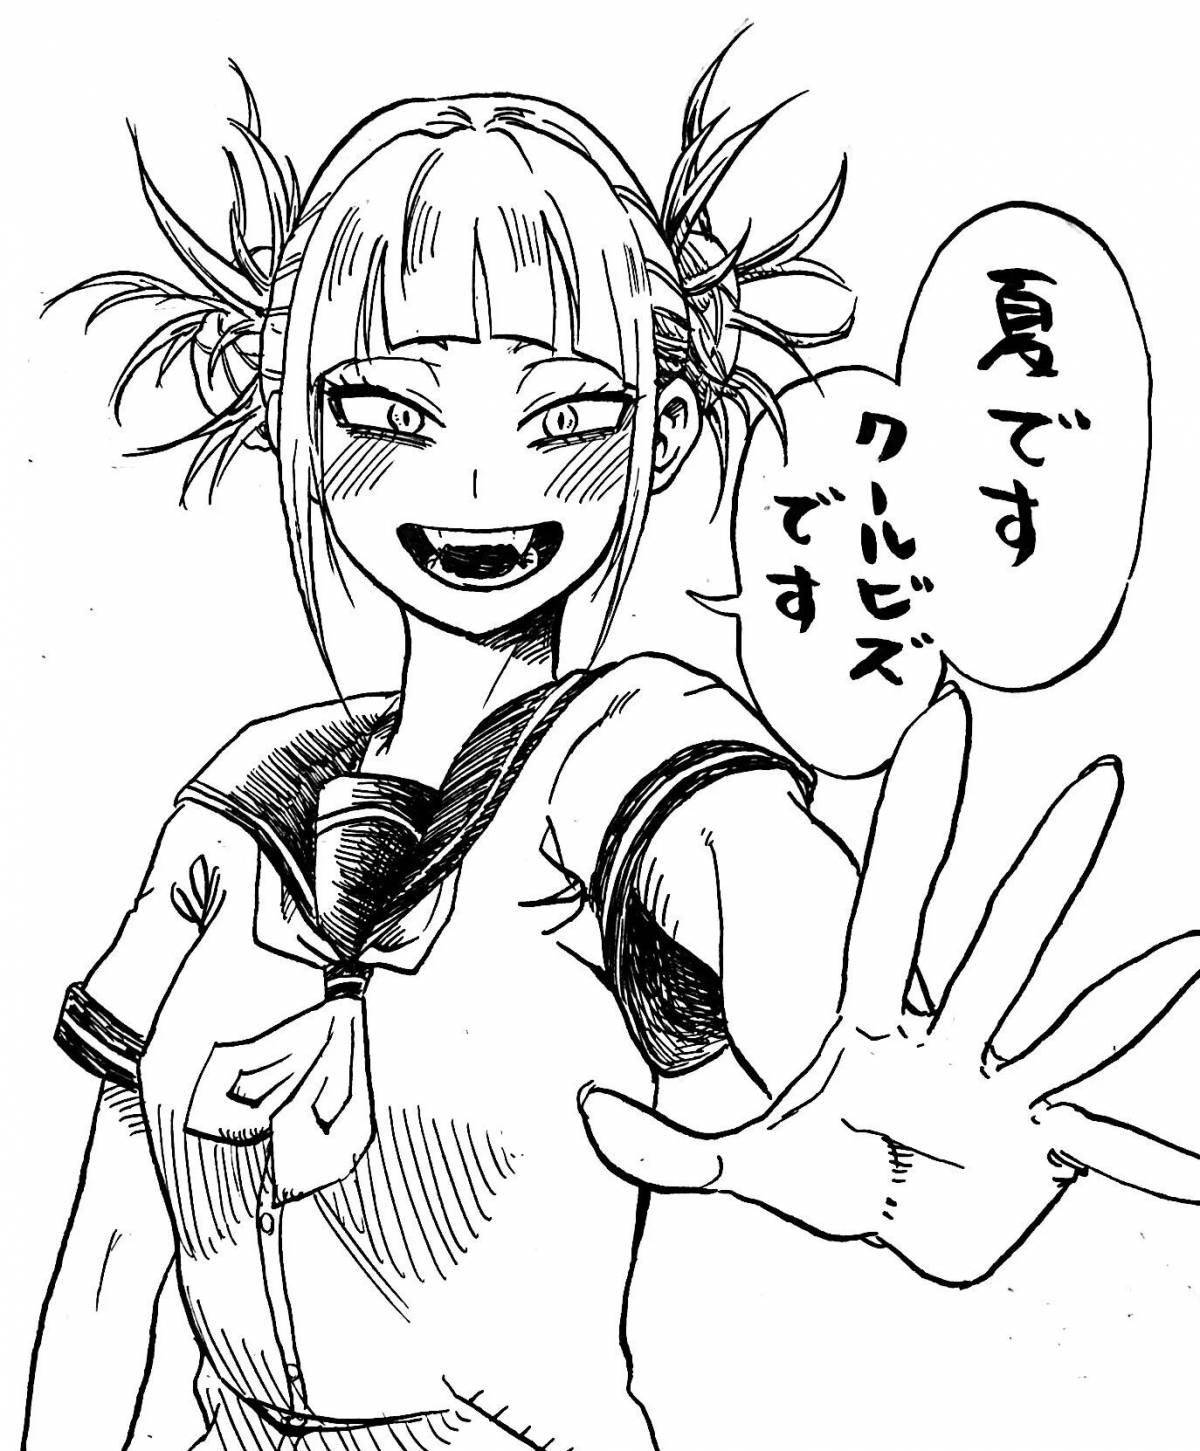 Charming toga himiko coloring page